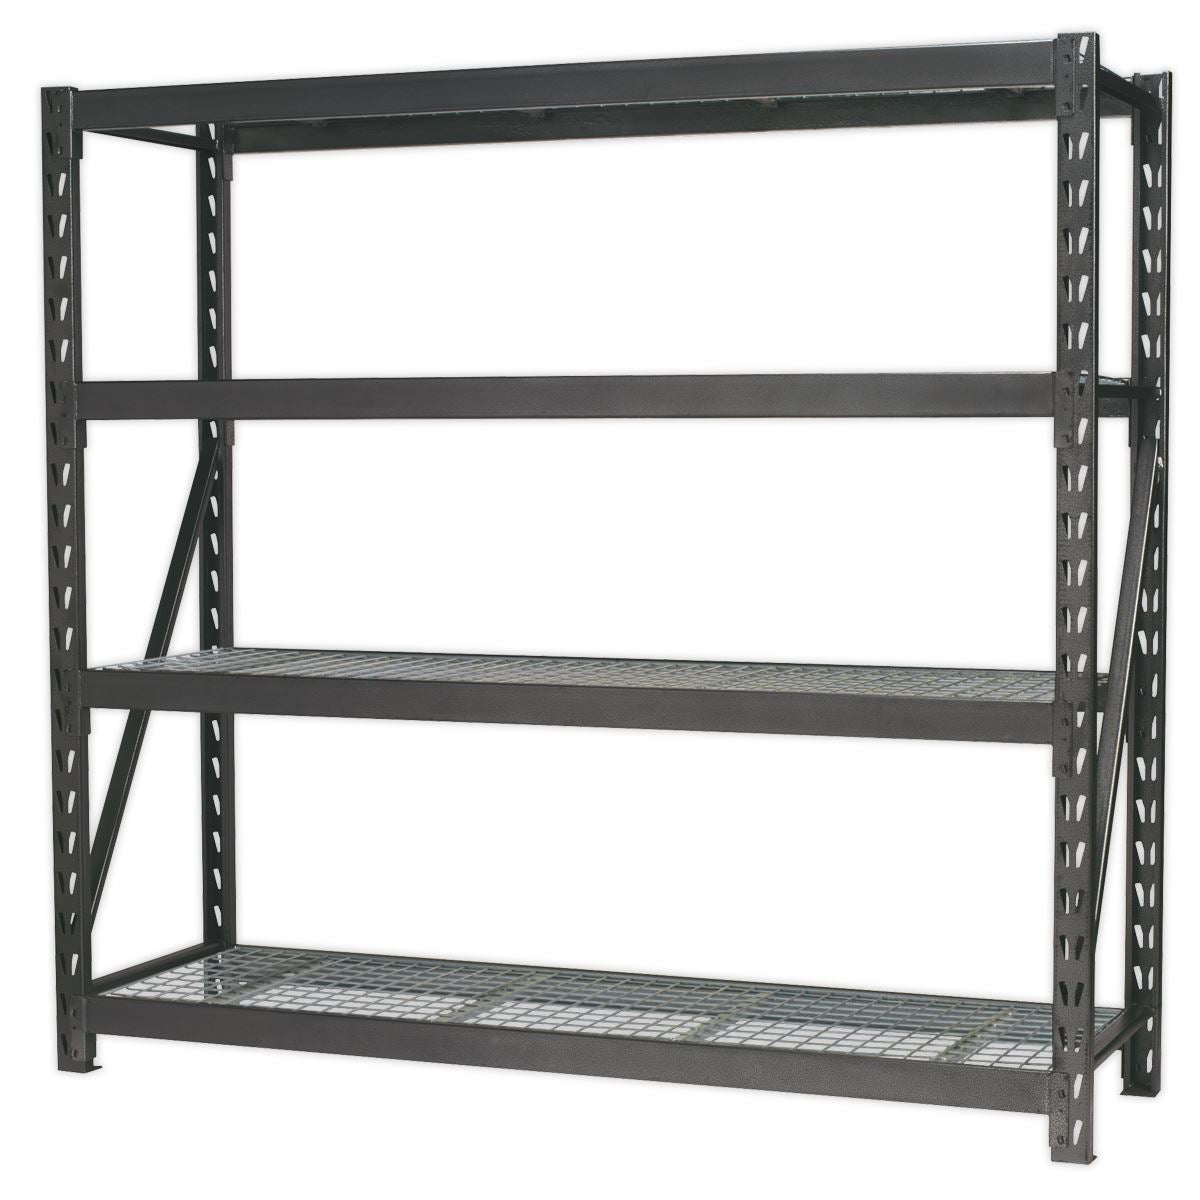 Sealey Heavy-Duty Racking Unit with 4 Mesh Shelves 640kg Capacity Per Level 1956mm